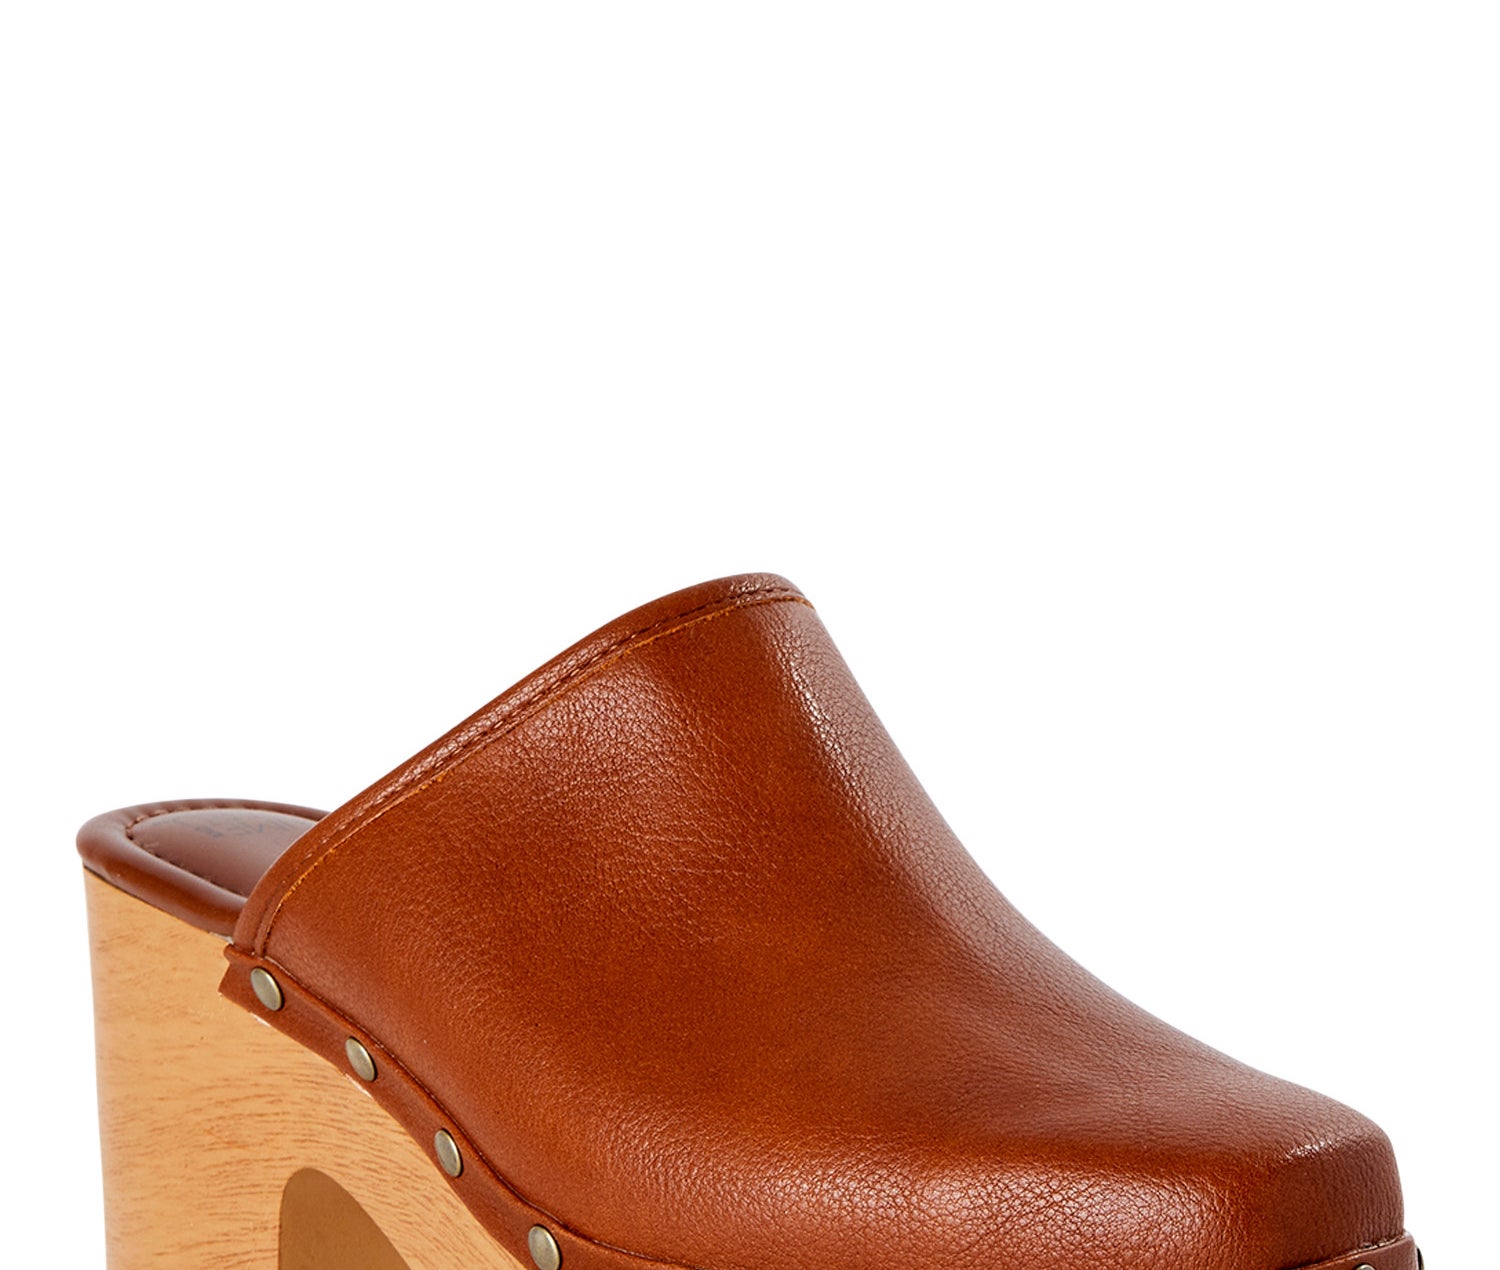 A brown leather shoe with wood